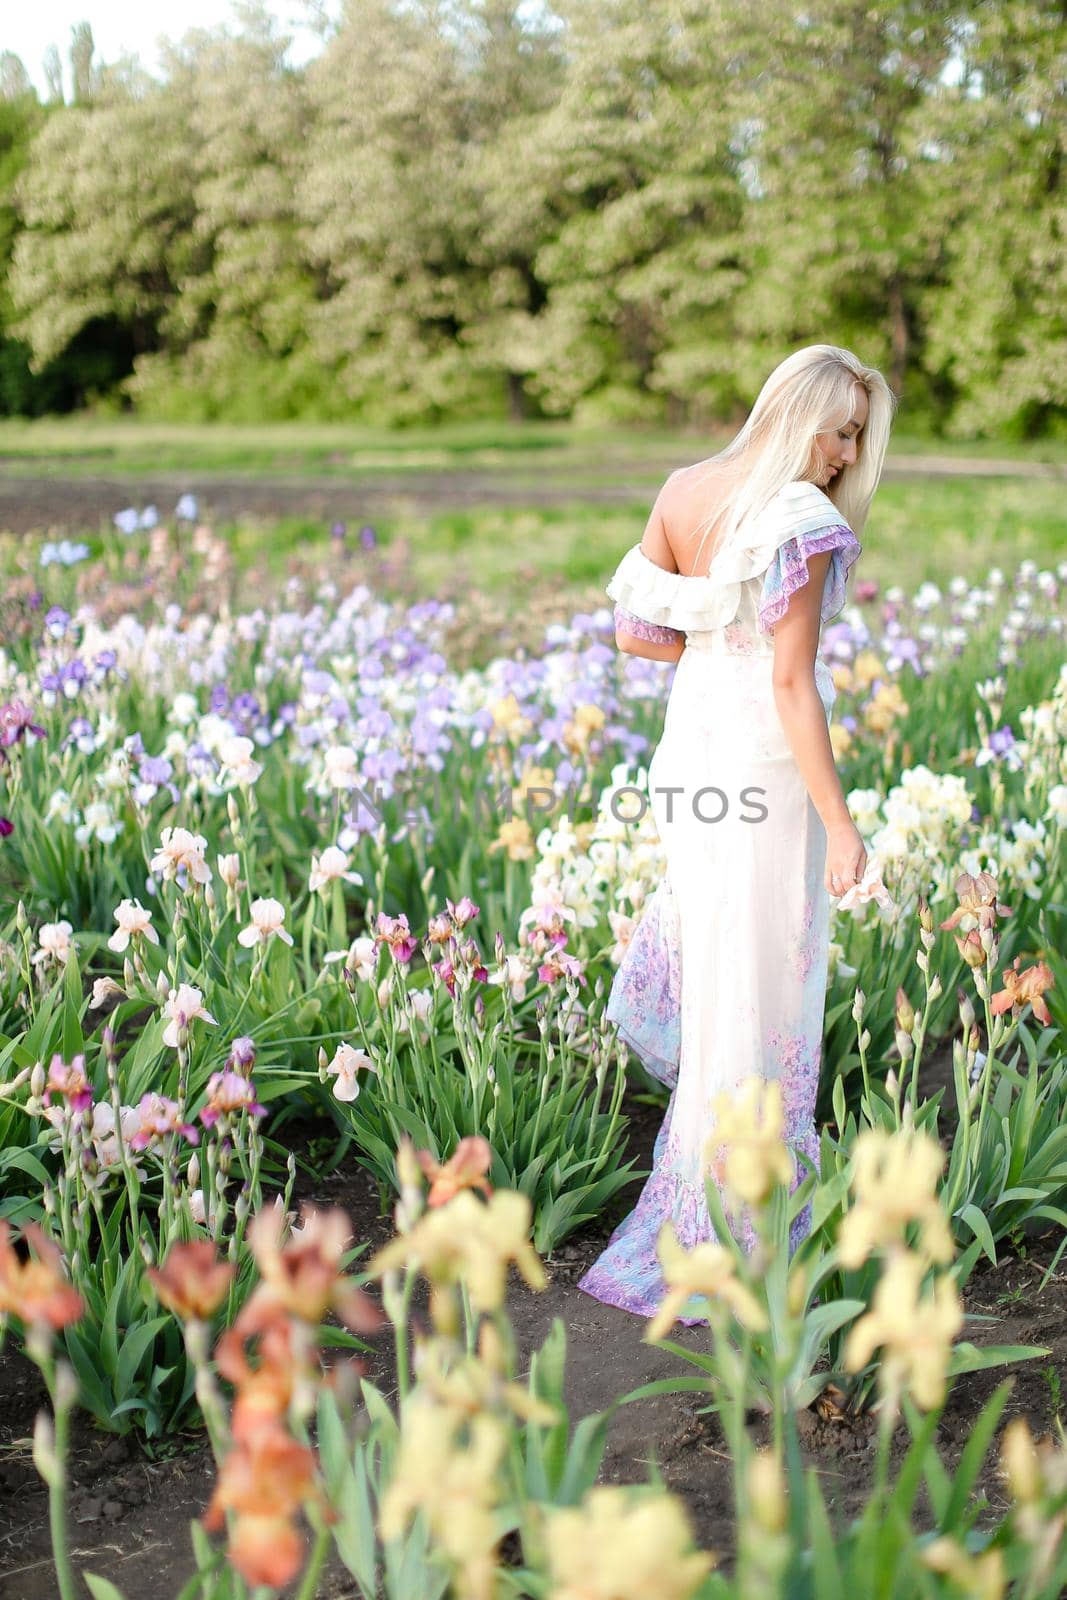 Young blonde woman wearing white dress standing near irises on garden. Concept of human beauty and flora, spring inspiration.